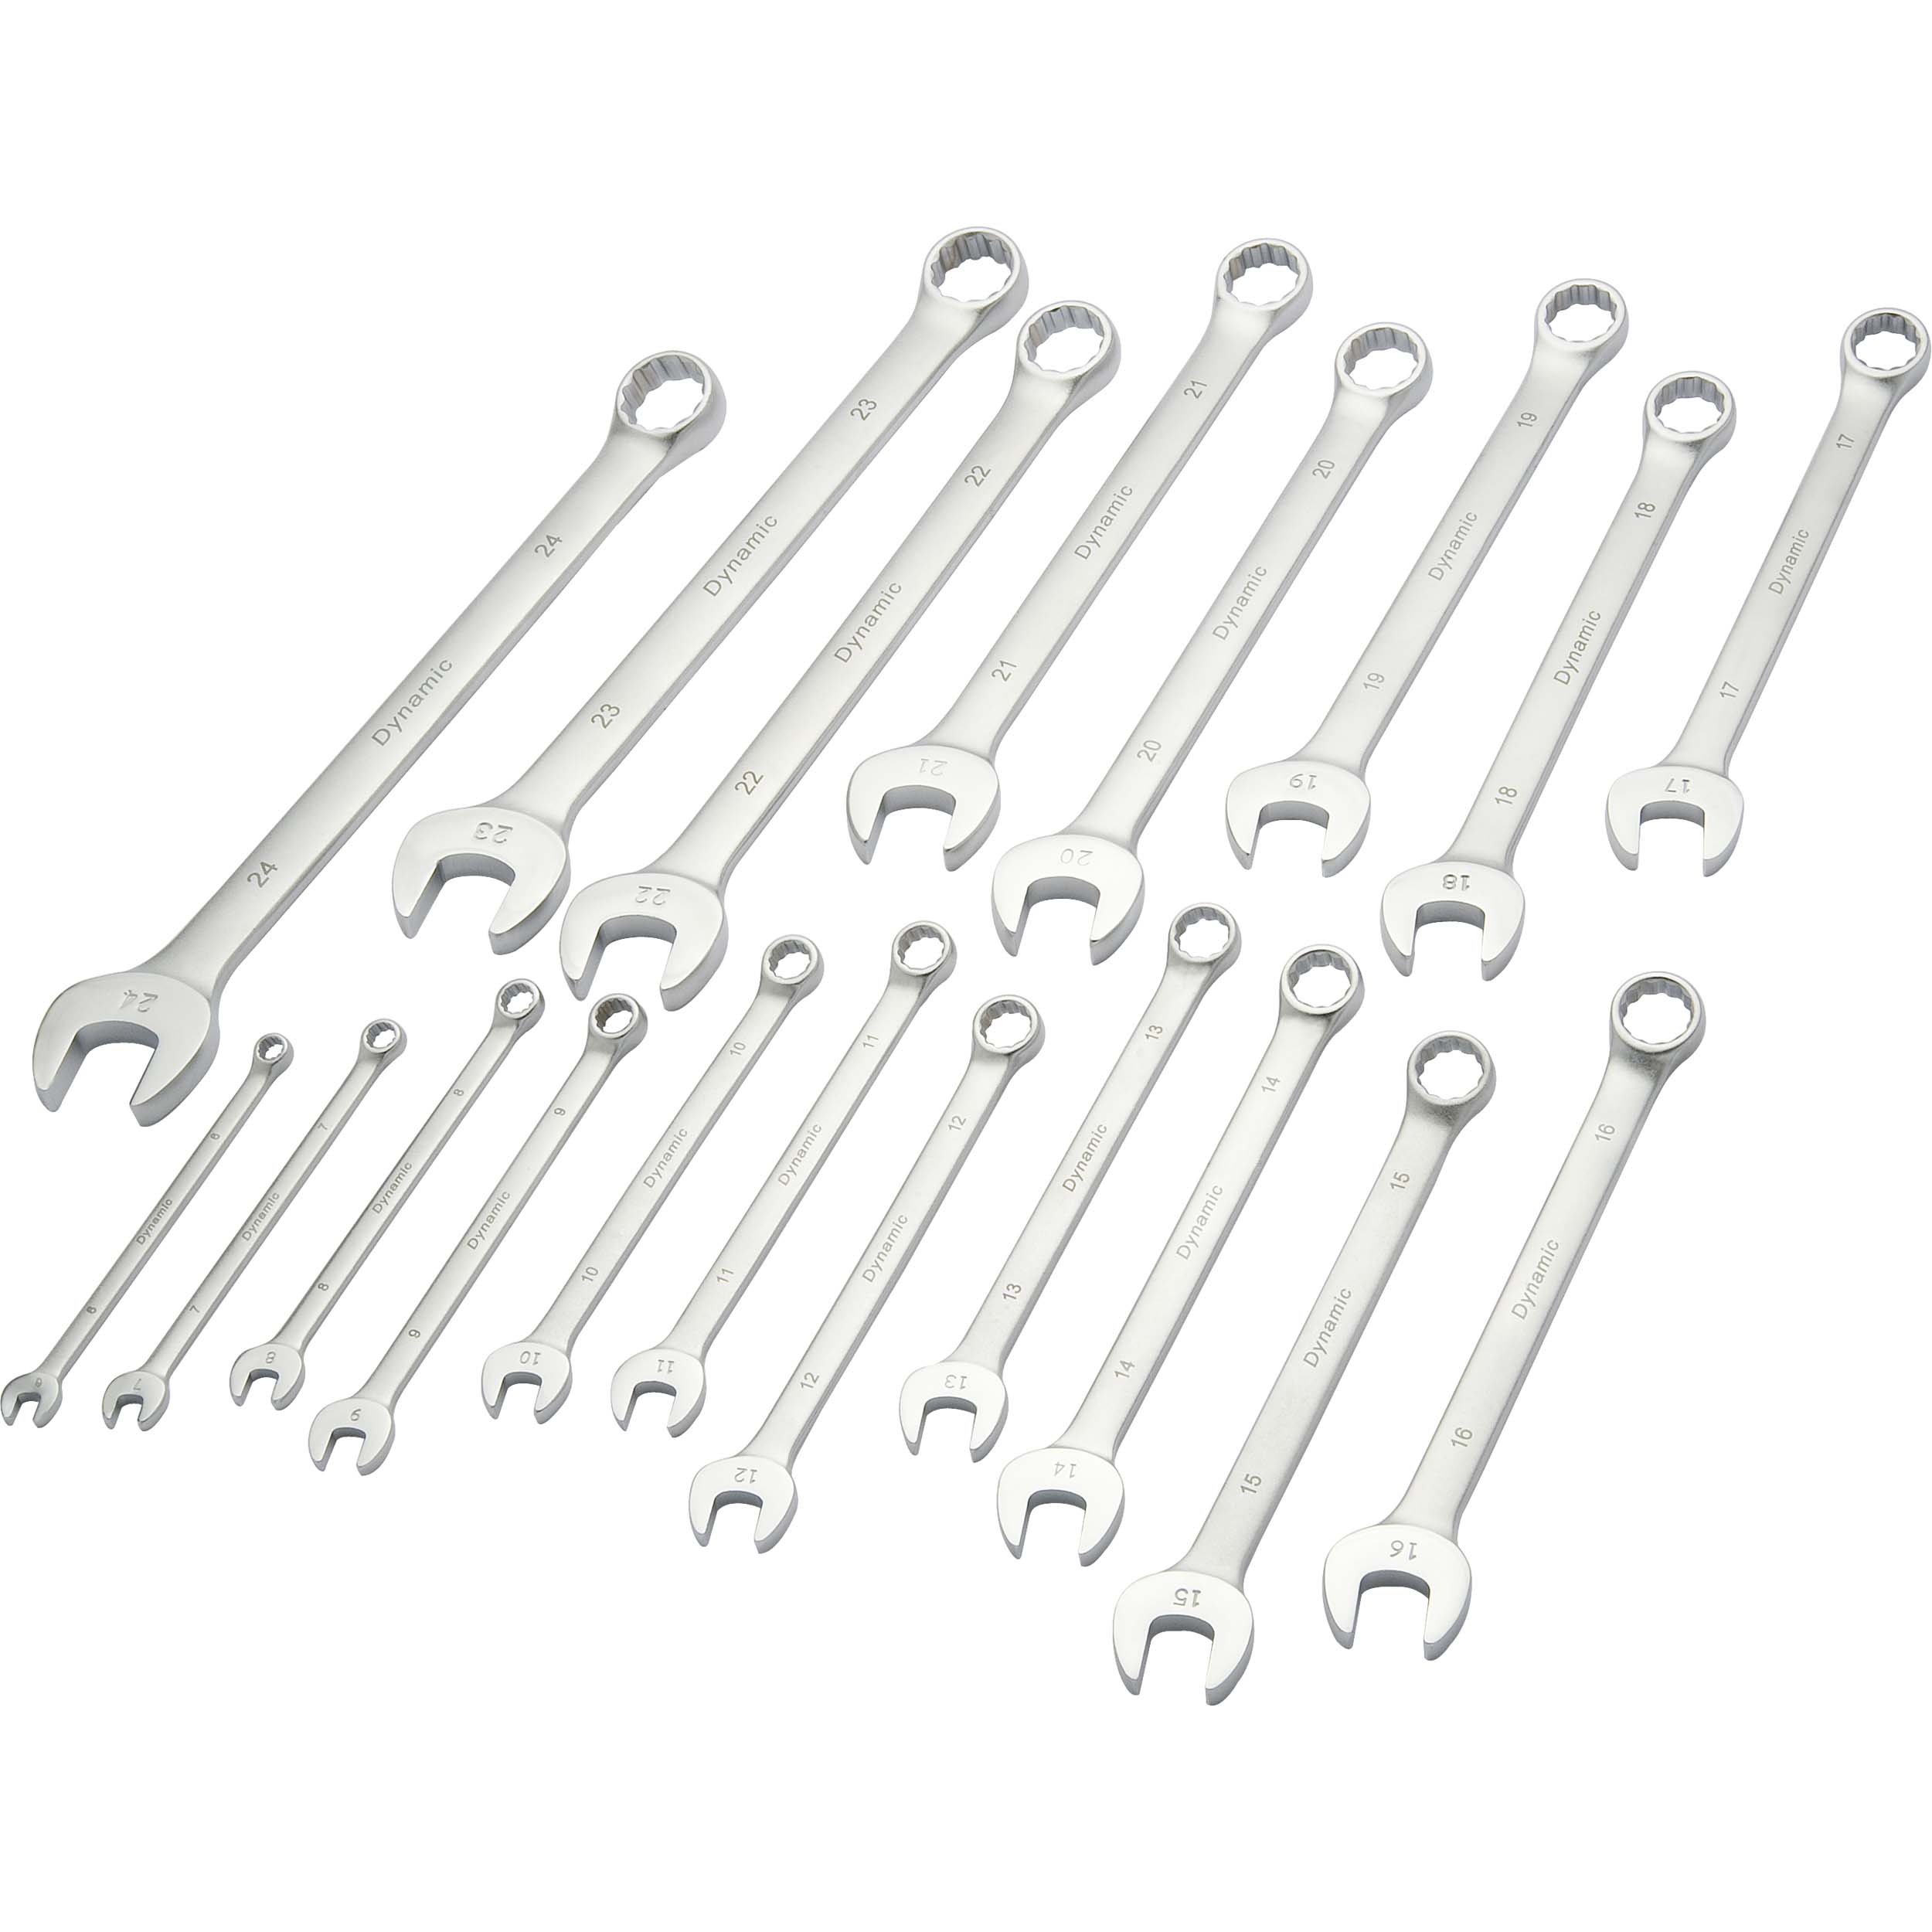 Tools 19pc Metric Combination Wrench Set, Contractor Series, With Satin Finish, 6mm - 24mm